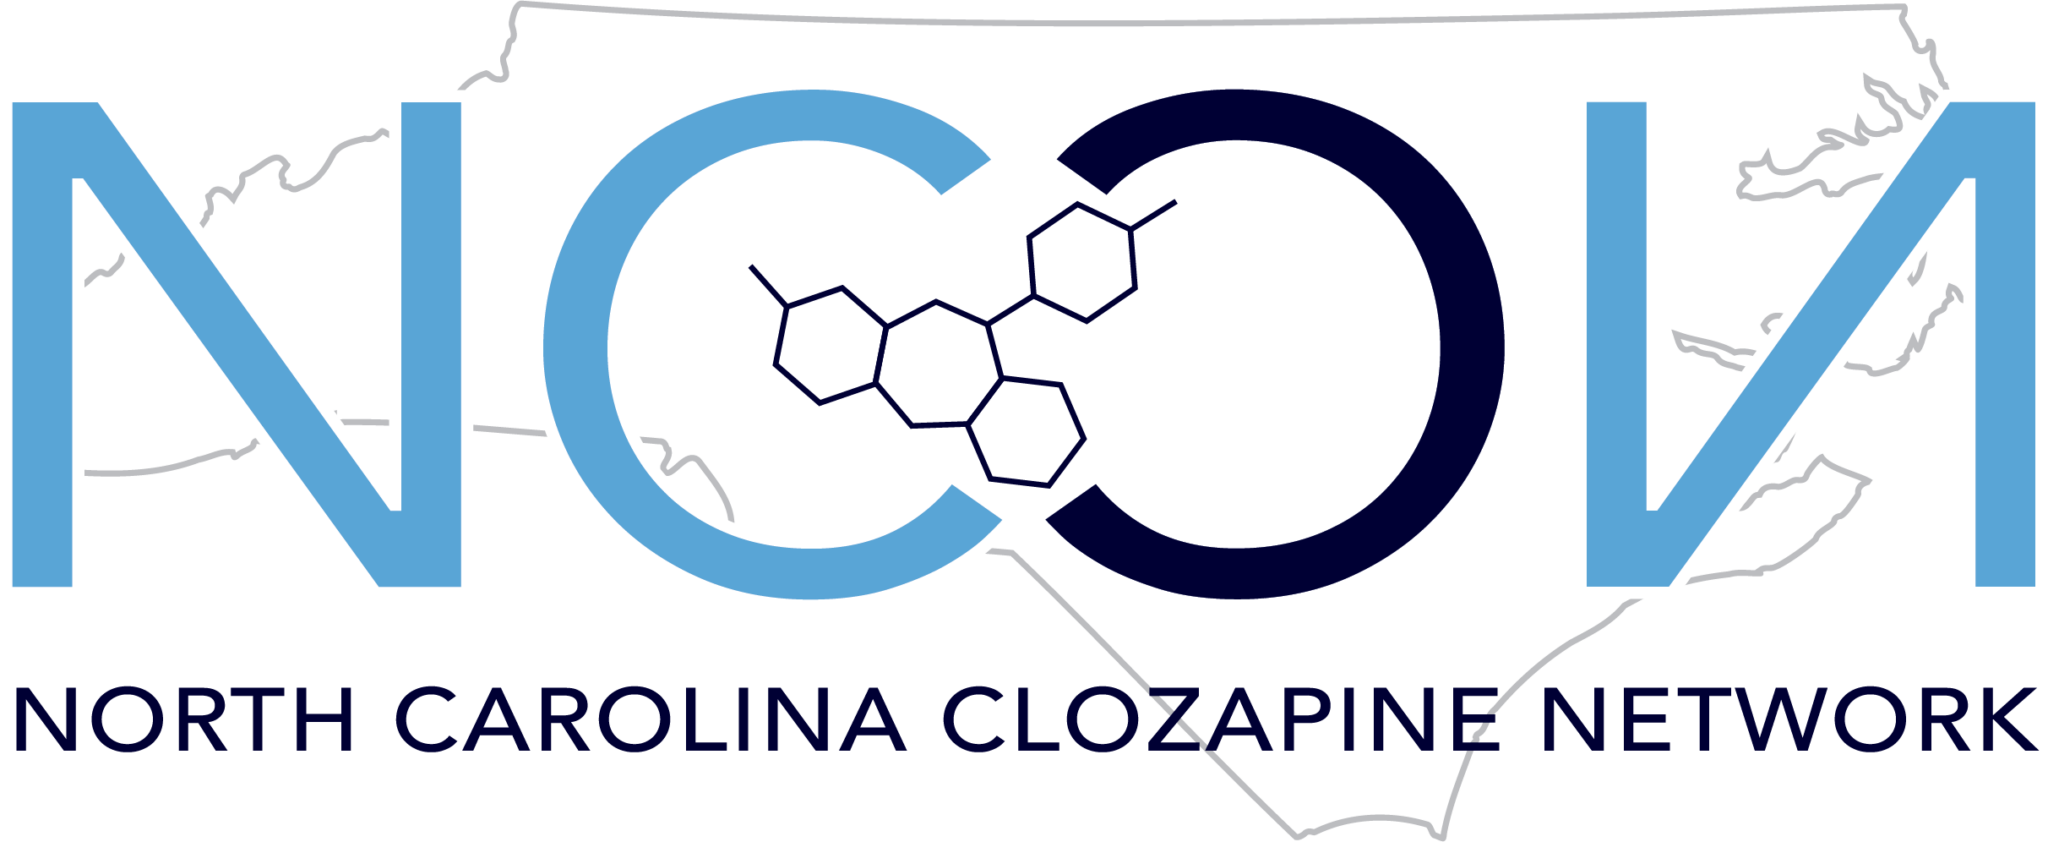 North Carolina Clozapine Network (NCCN) UNC Center for Excellence in